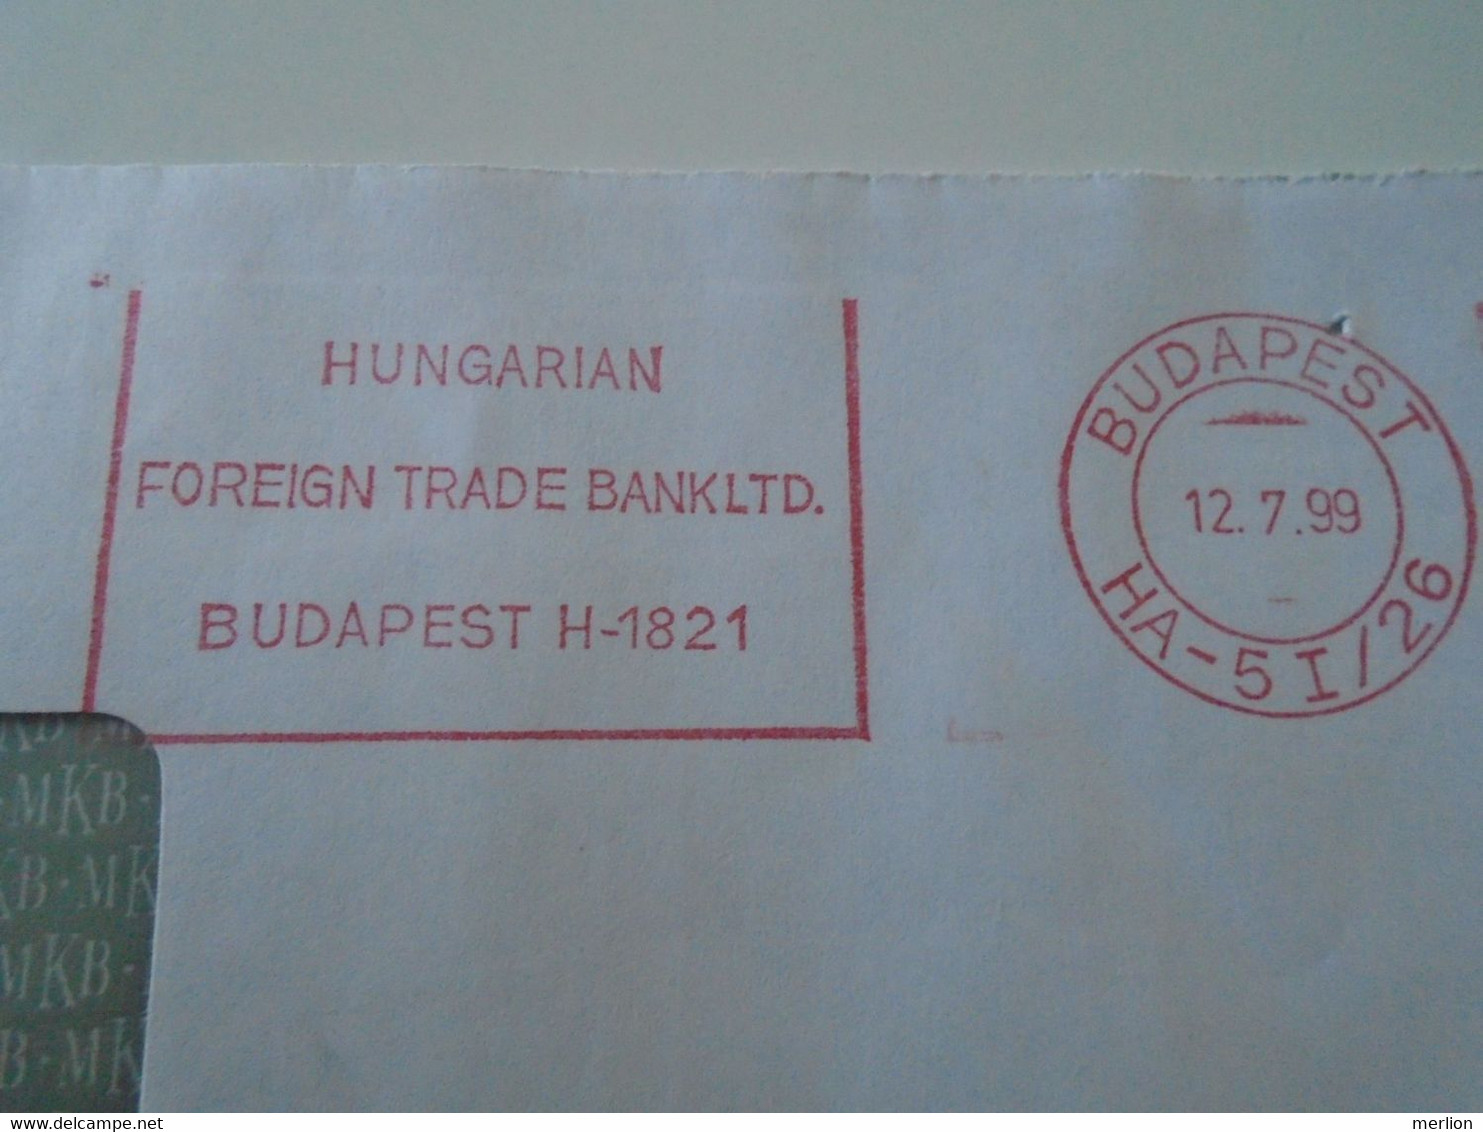 AD00012.119  Hungary Cover  -EMA Red Meter Freistempel-   1999   Budapest  MKB - Hungarian Foreign Trade Bank - Automaatzegels [ATM]